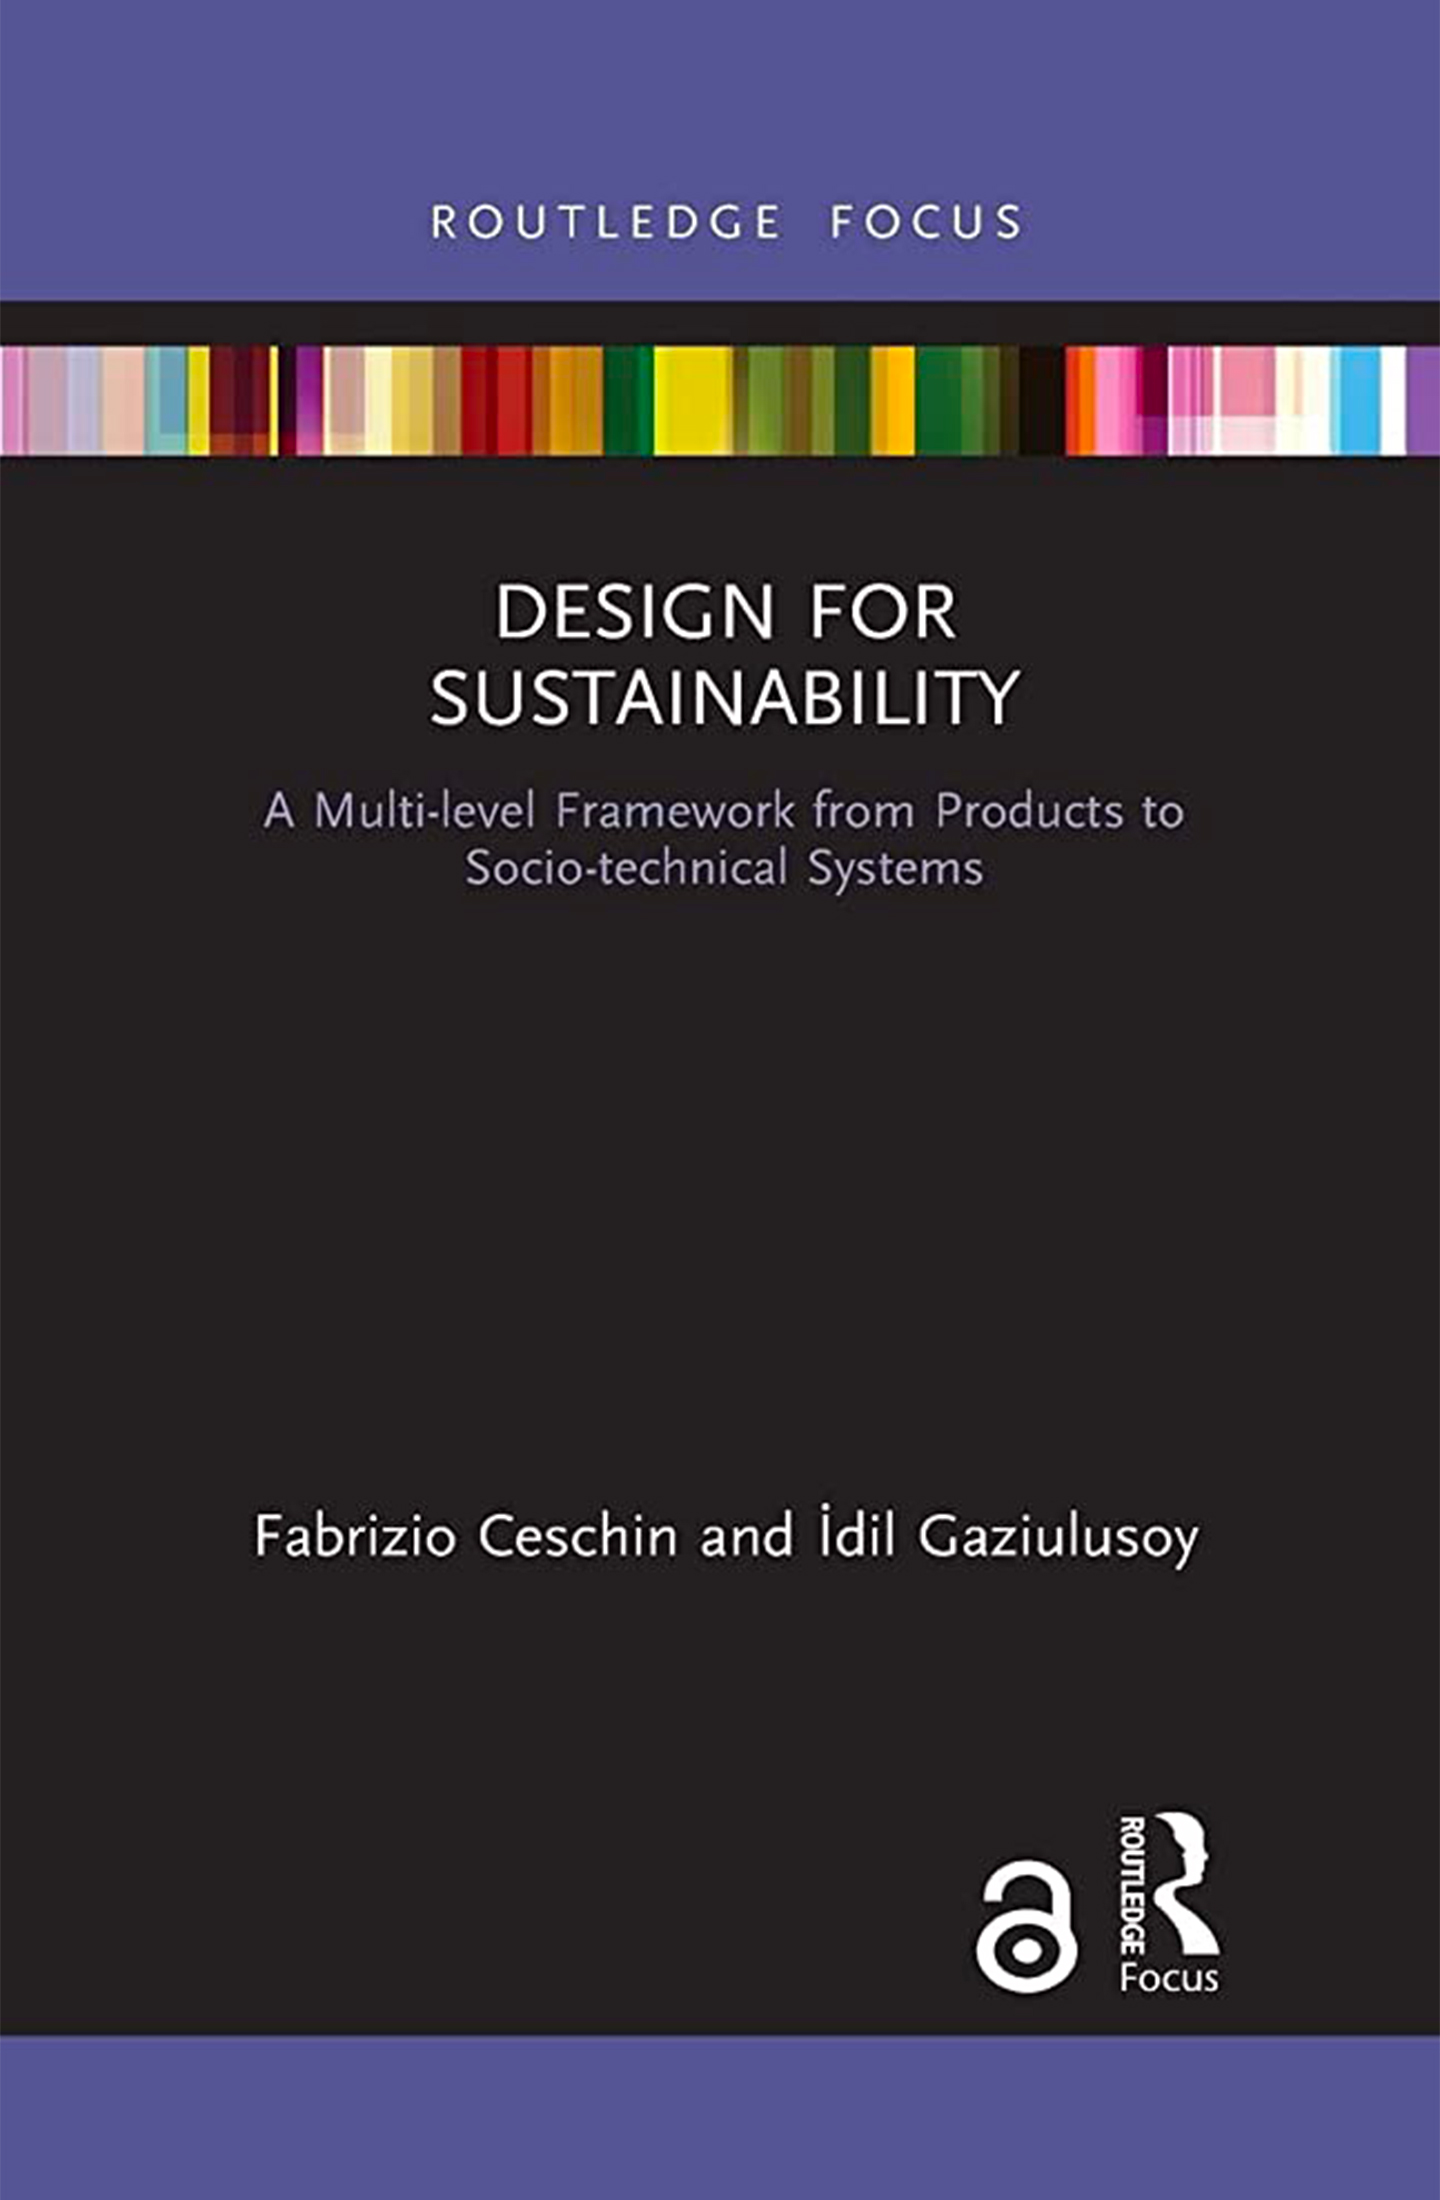 Ceschin, F. and Gaziulusoy, ç. (2021) Design for sustainability: a multi-level framework from products to socio-technical systems. London: Routledge. Routledge focus on the environment and sustainability